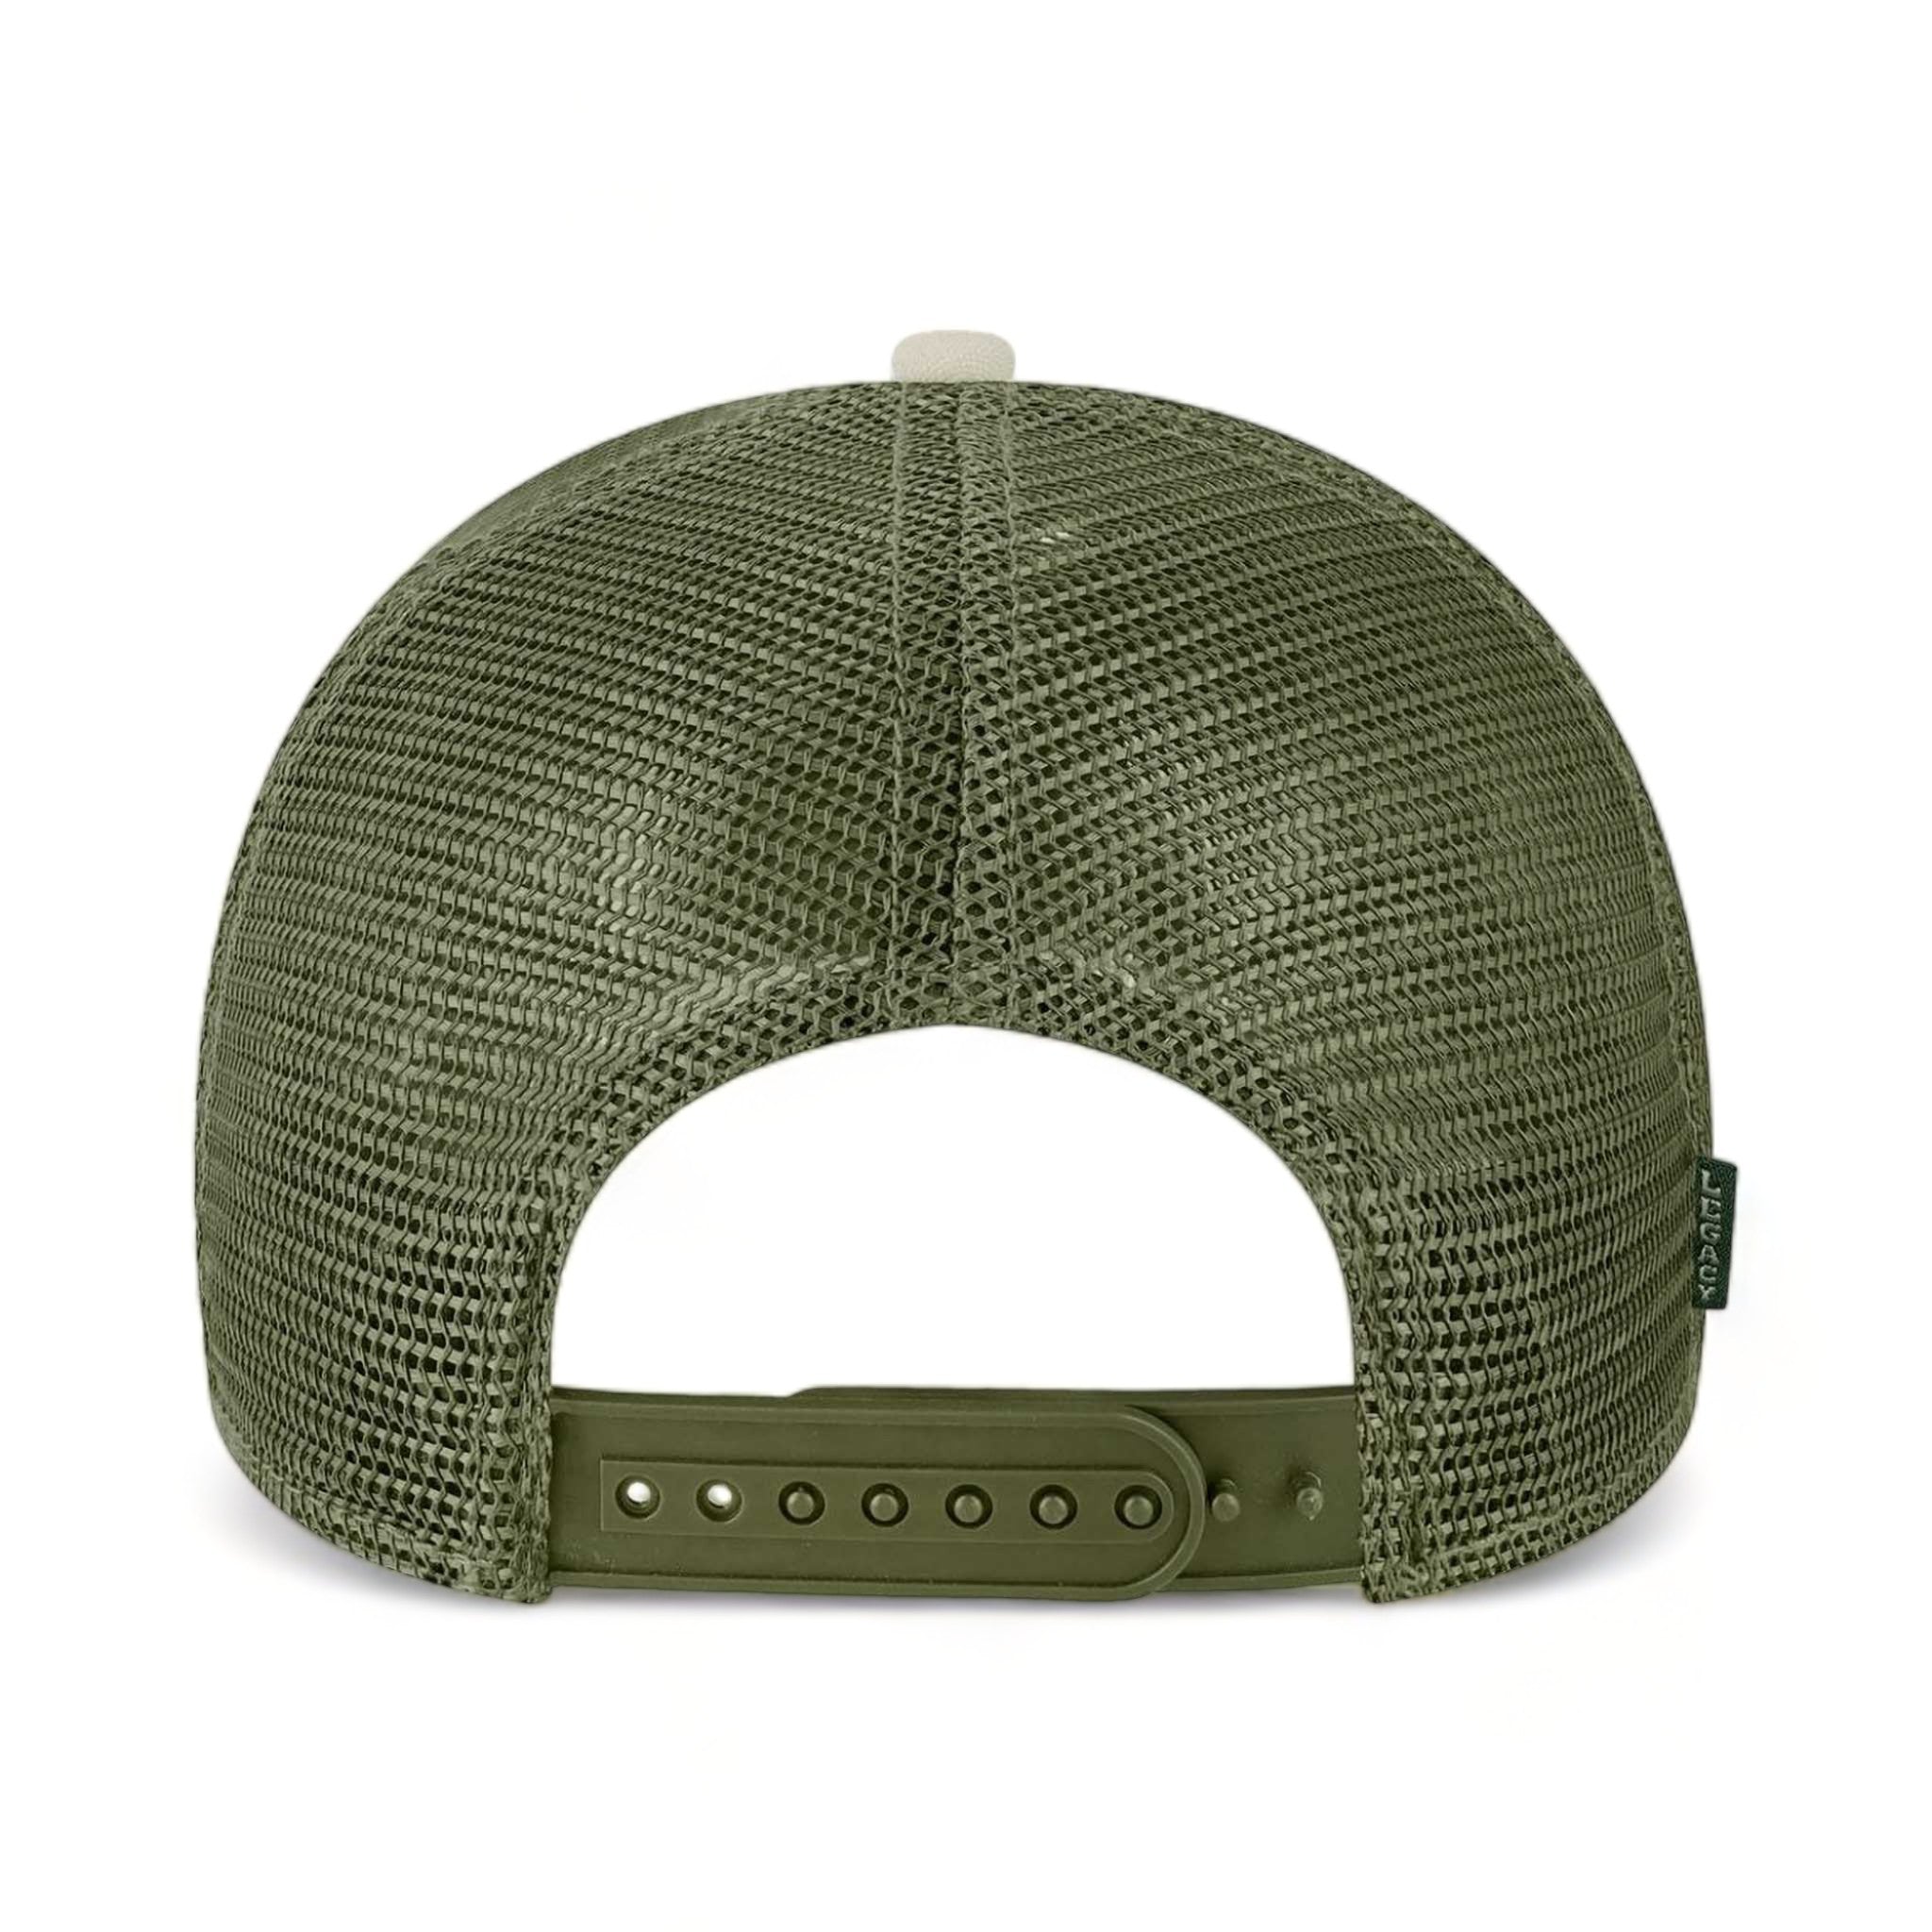 Back view of LEGACY MPS custom hat in stone, bronze and light olive green